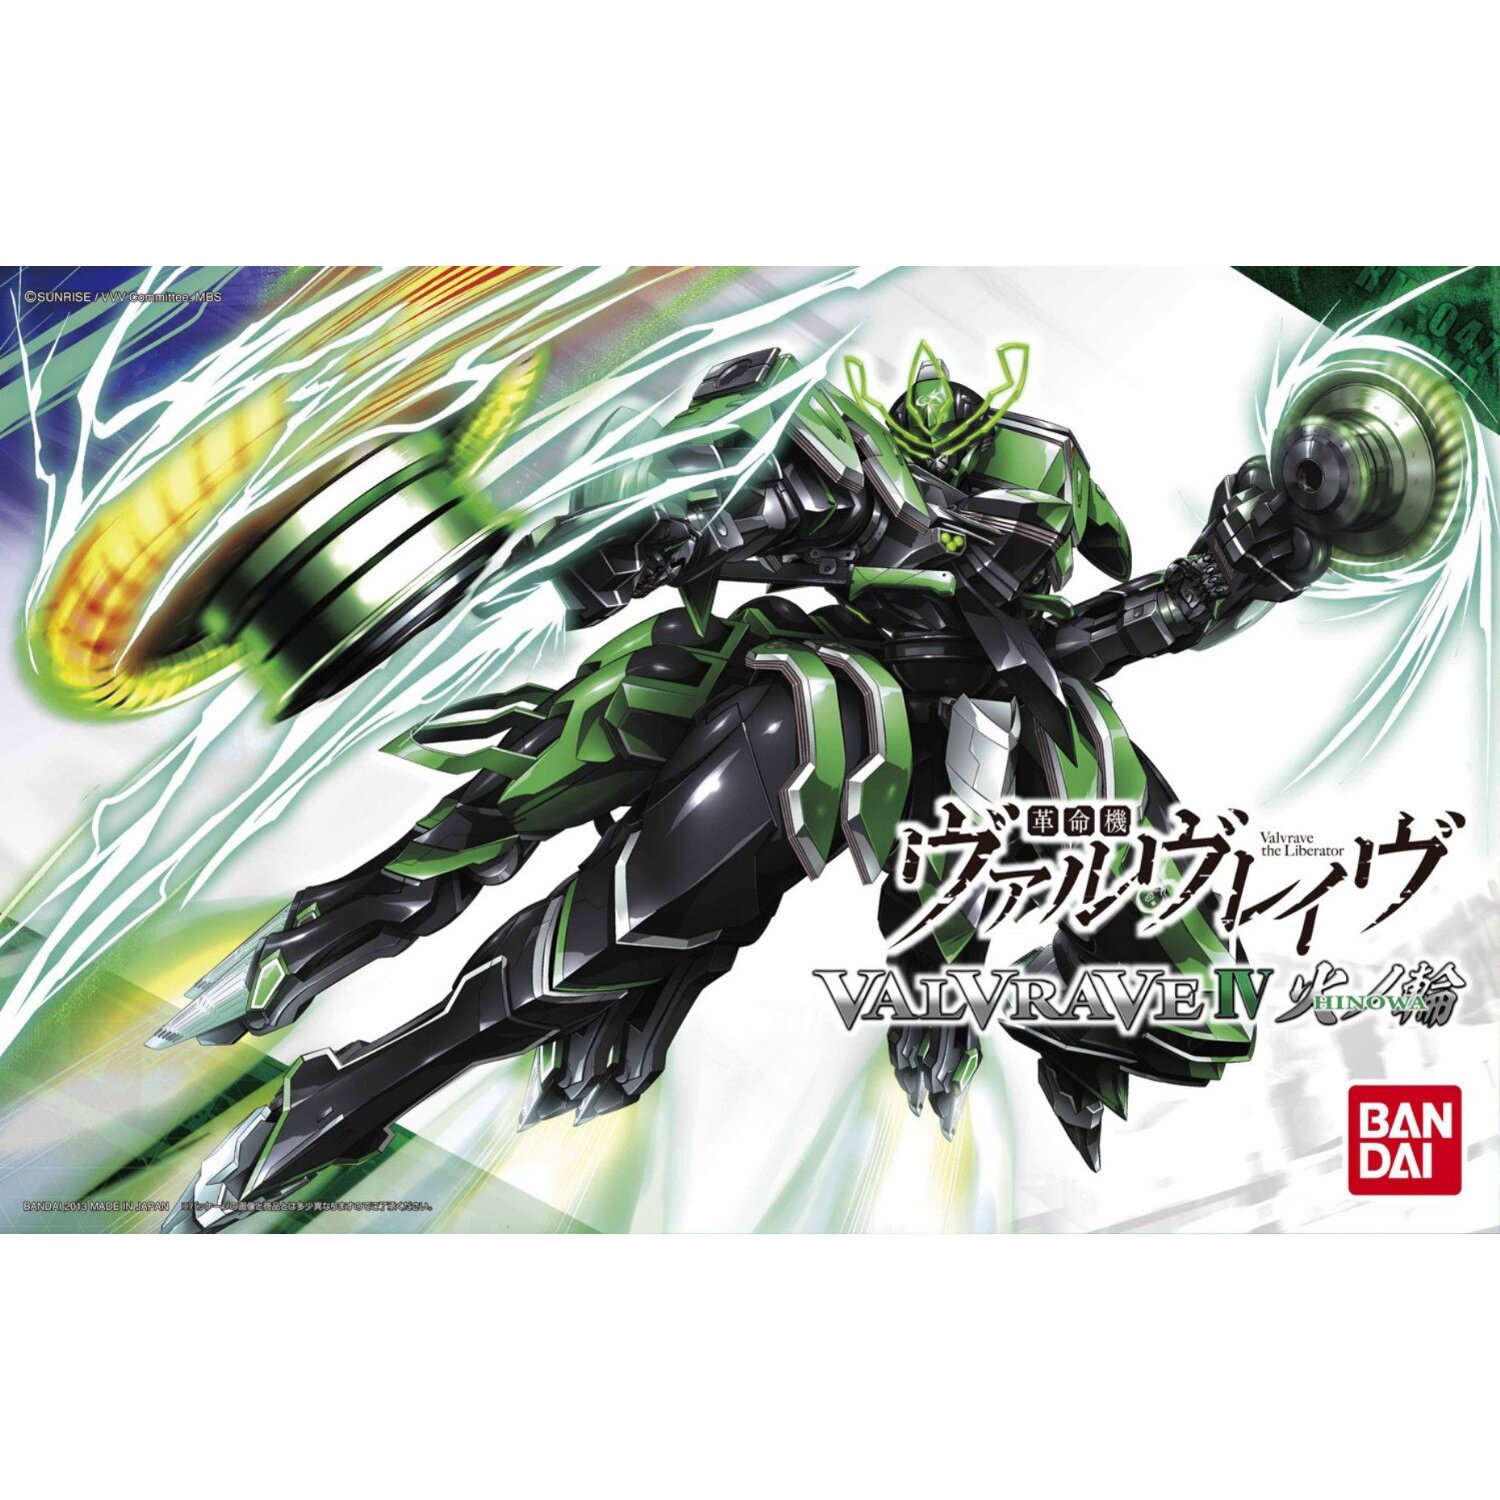  Valvrave the Liberator Vol.3 - Limited Edition w